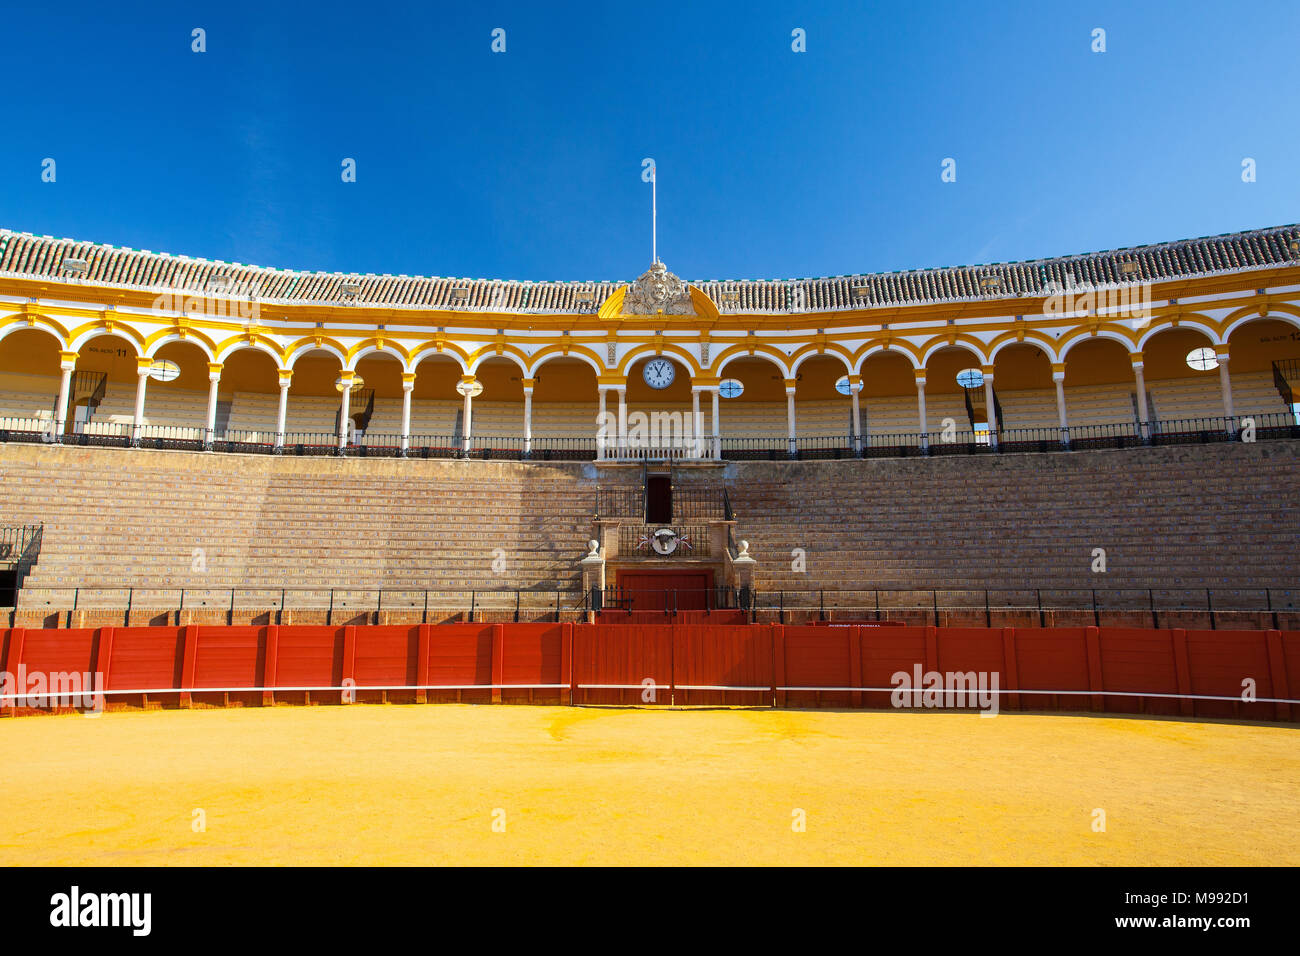 Seville, Spain - November 19,2016: Bullfight arena, plaza de toros at Sevilla.During the annual Seville Fair in Seville, it is the site of one of the  Stock Photo